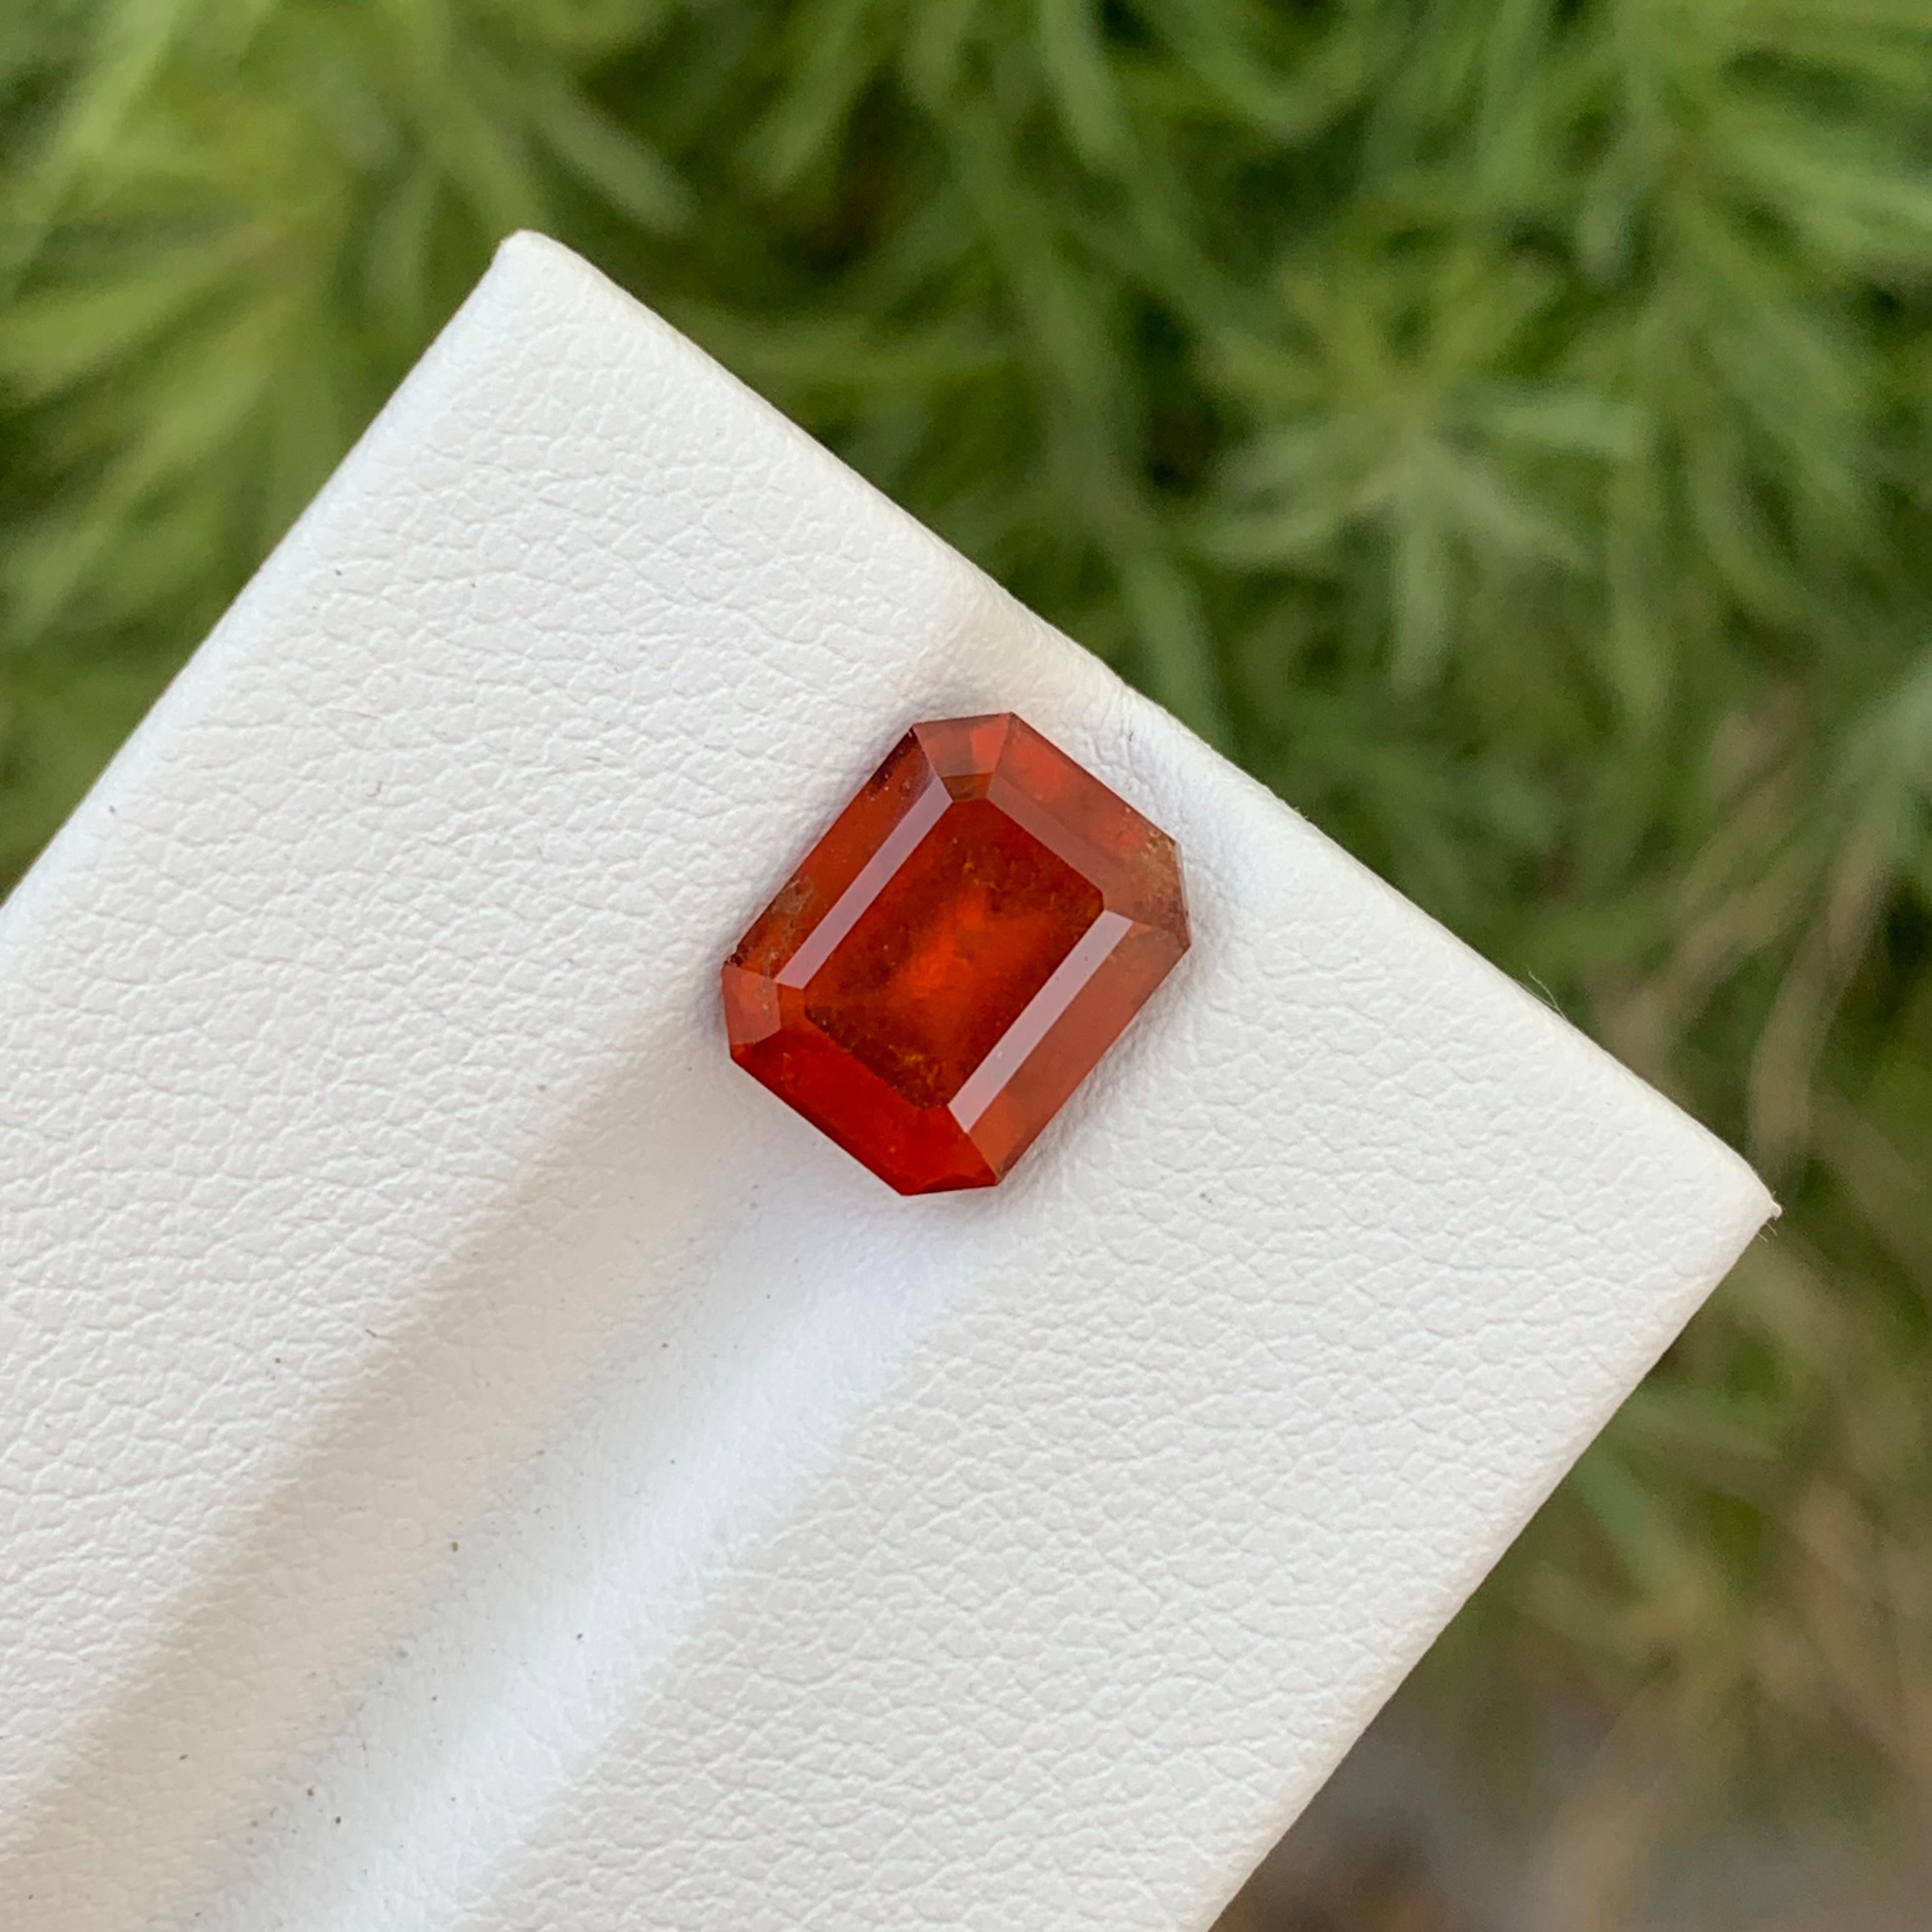 Emerald Cut 3.75 Carats Pretty Loose Hessonite Smoky Garnet Gem For Jewellery Making  For Sale